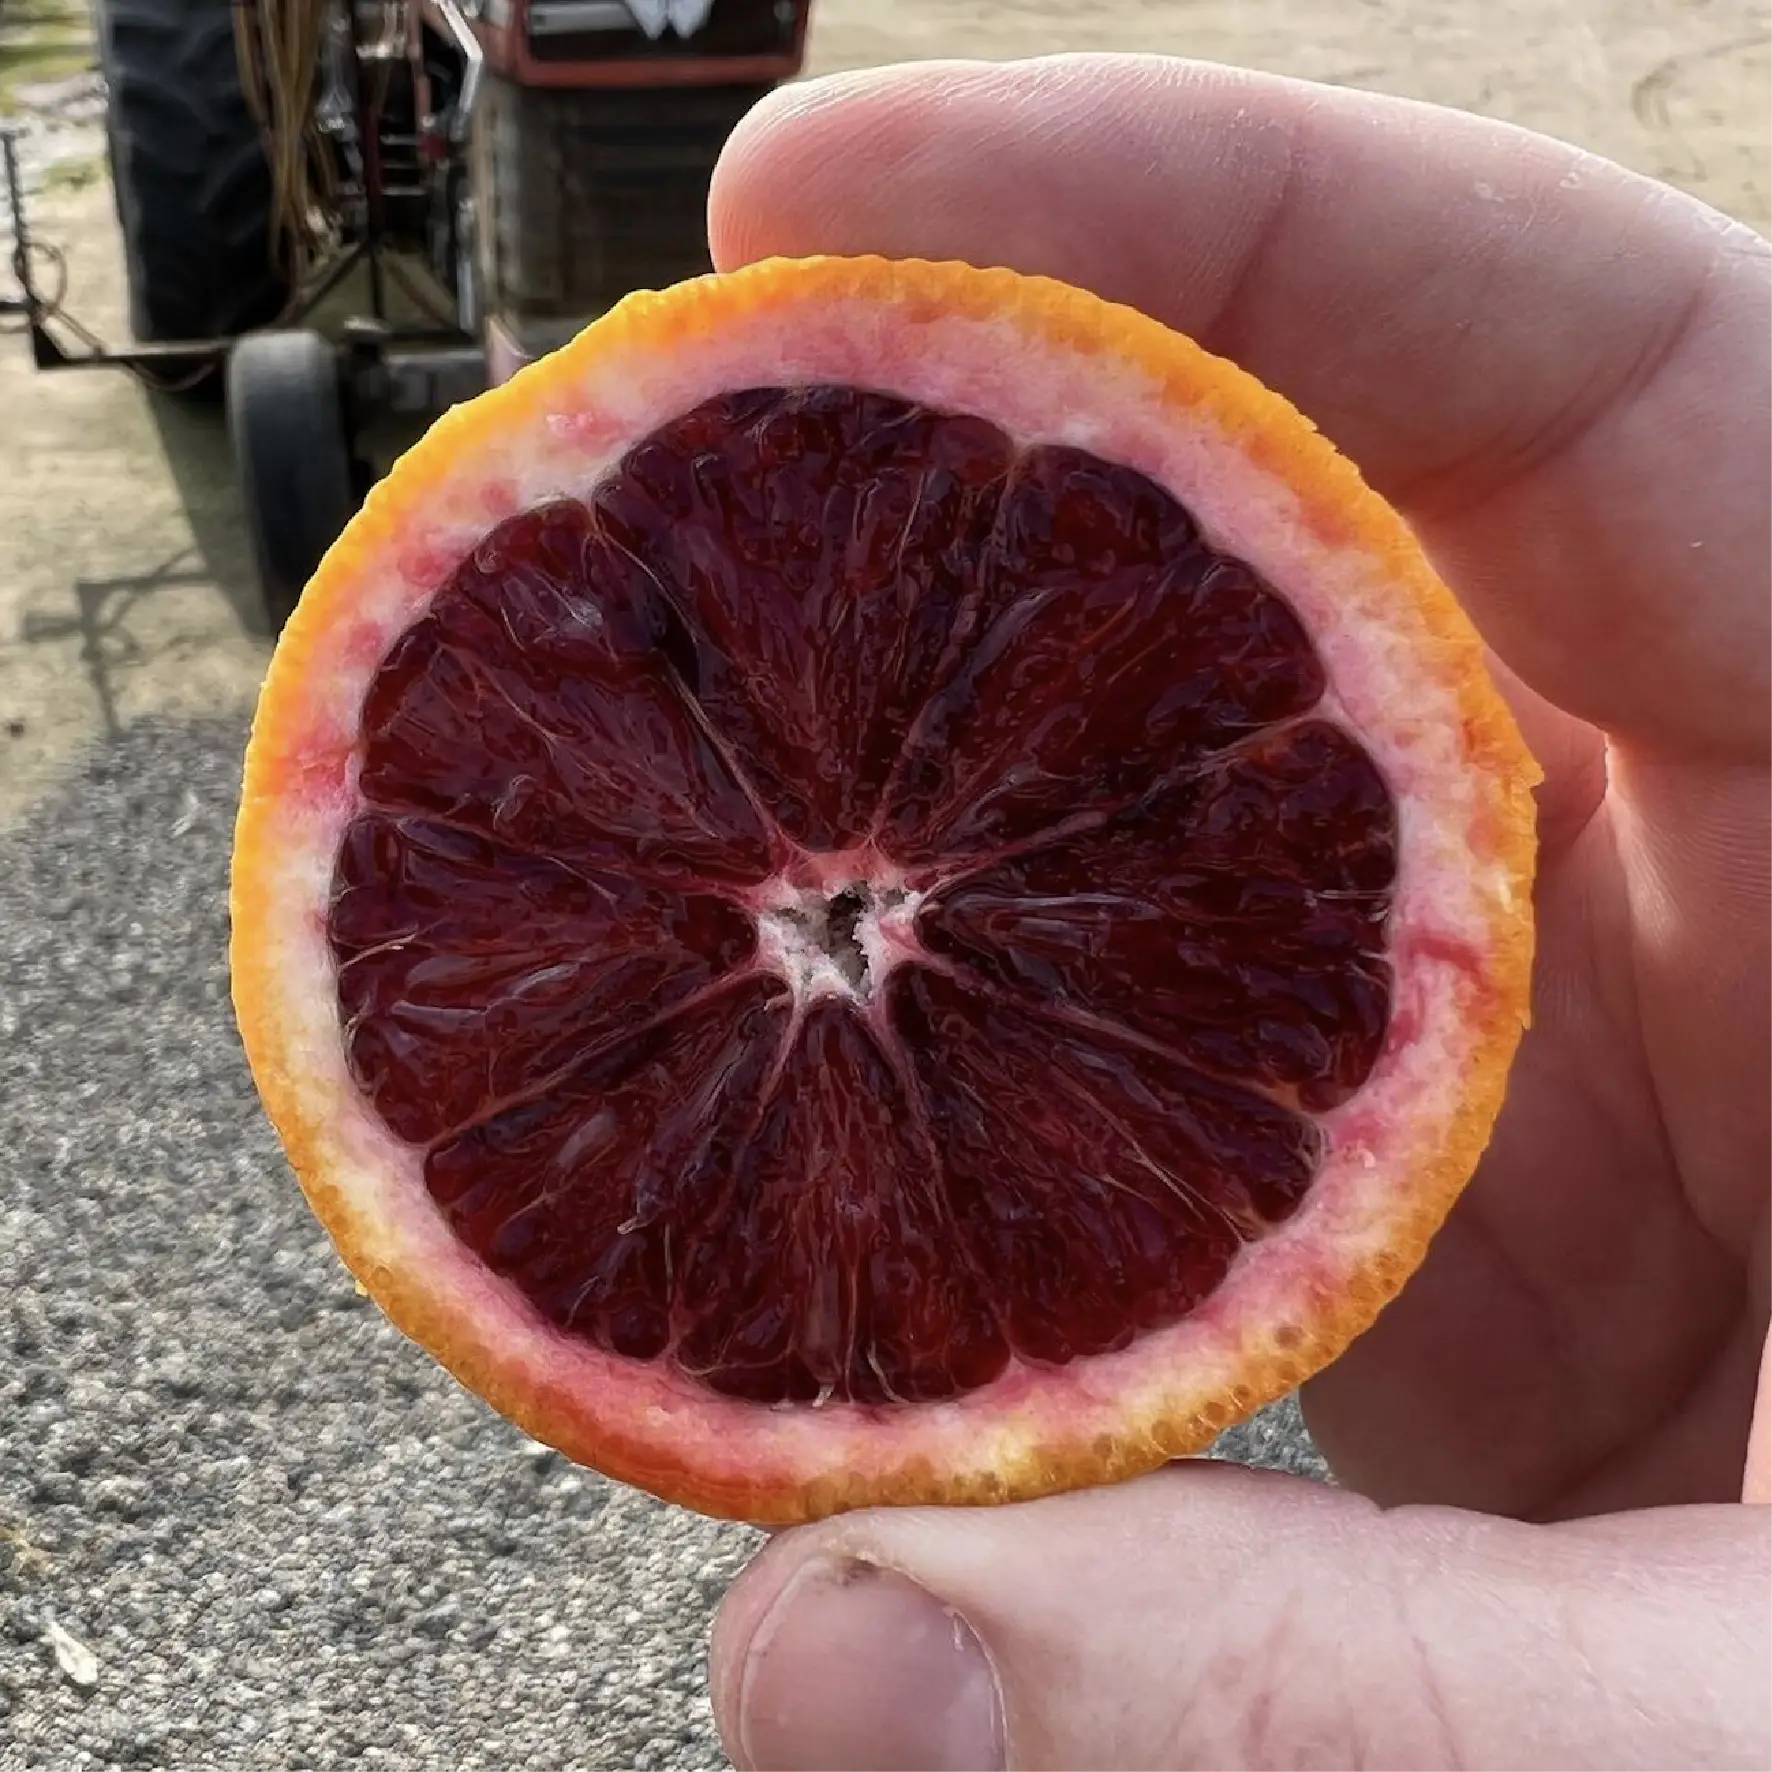 Tarocco Blood Oranges - Galpin Family Farms Delivery